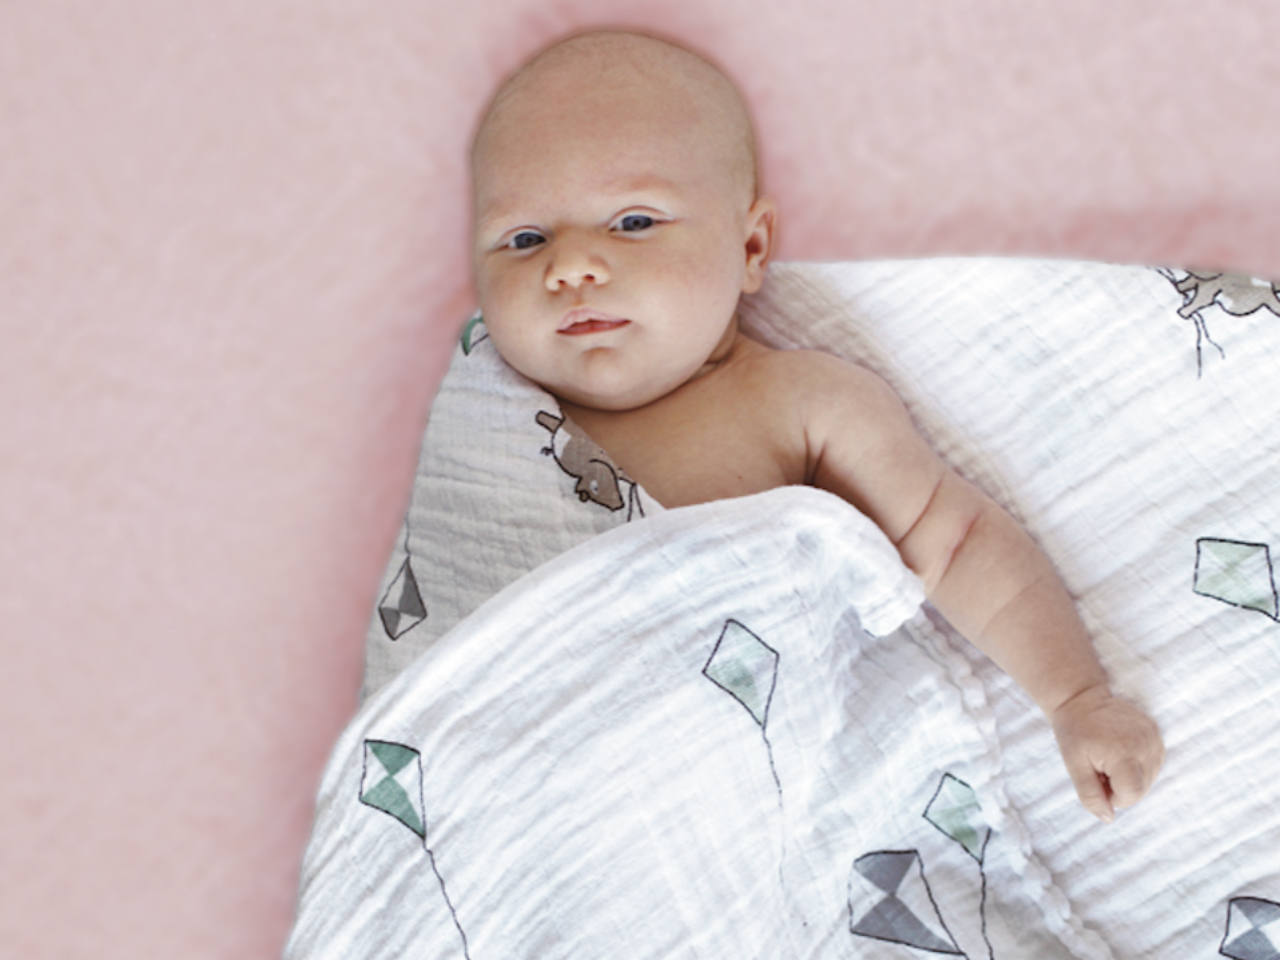 A baby being swaddled in a muslin blanket